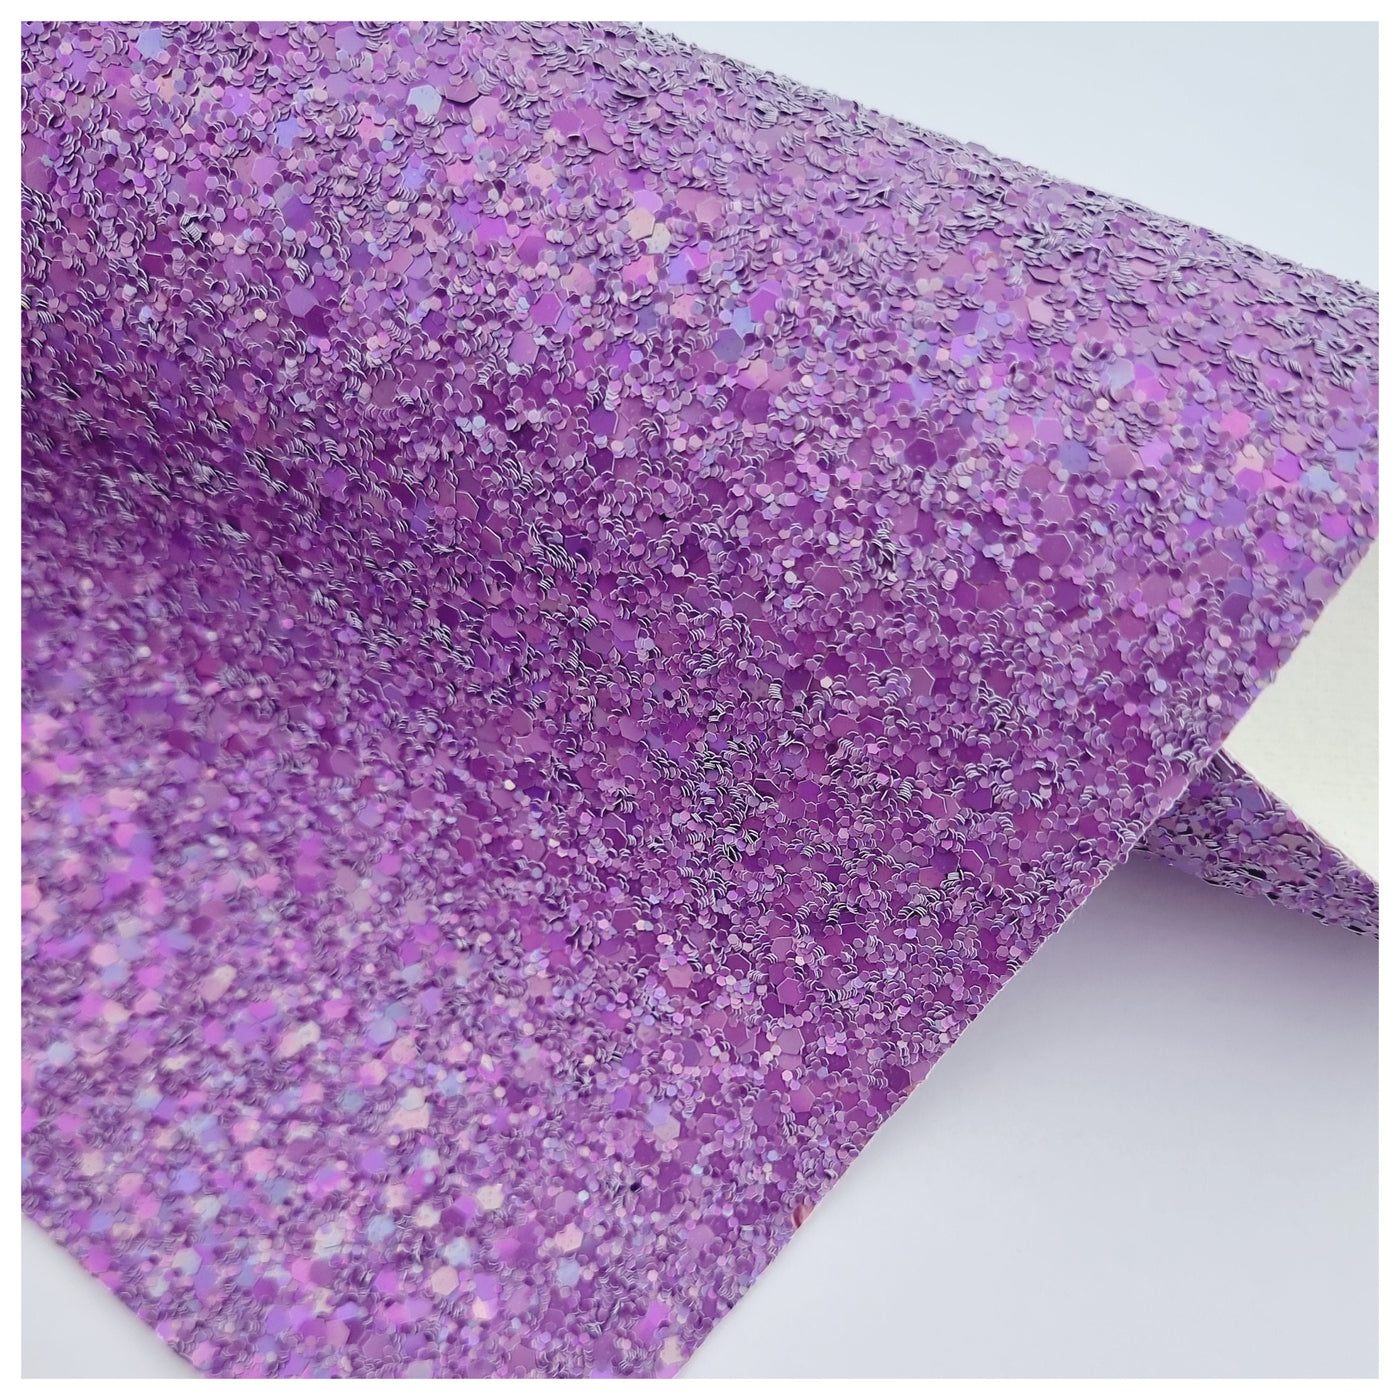 A4 Sheet of Iridescent Orchid Chunky Glitter